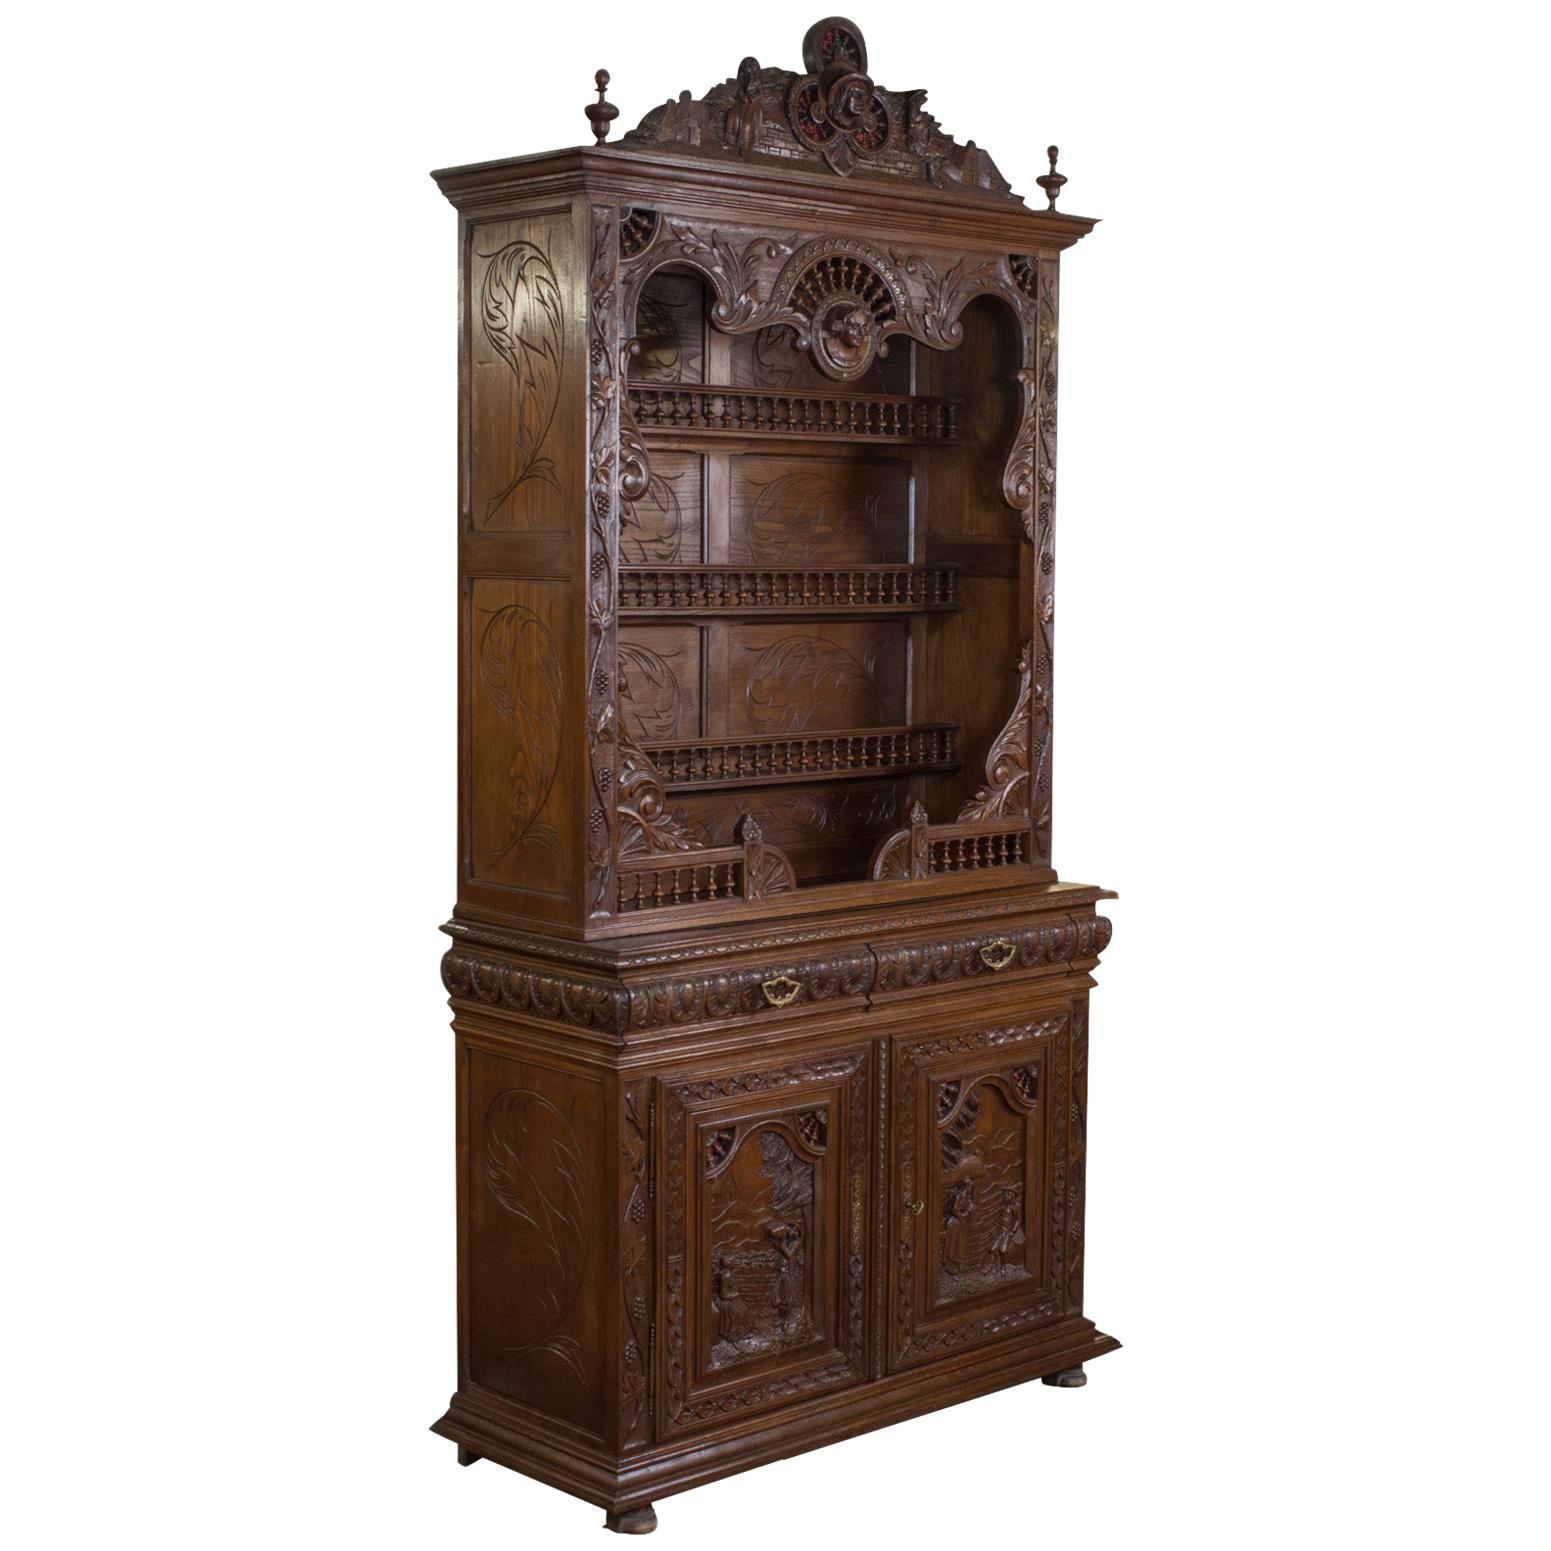 Breton Cabinet, Carved French Sideboard, Oak, Late 19th Century, circa 1880